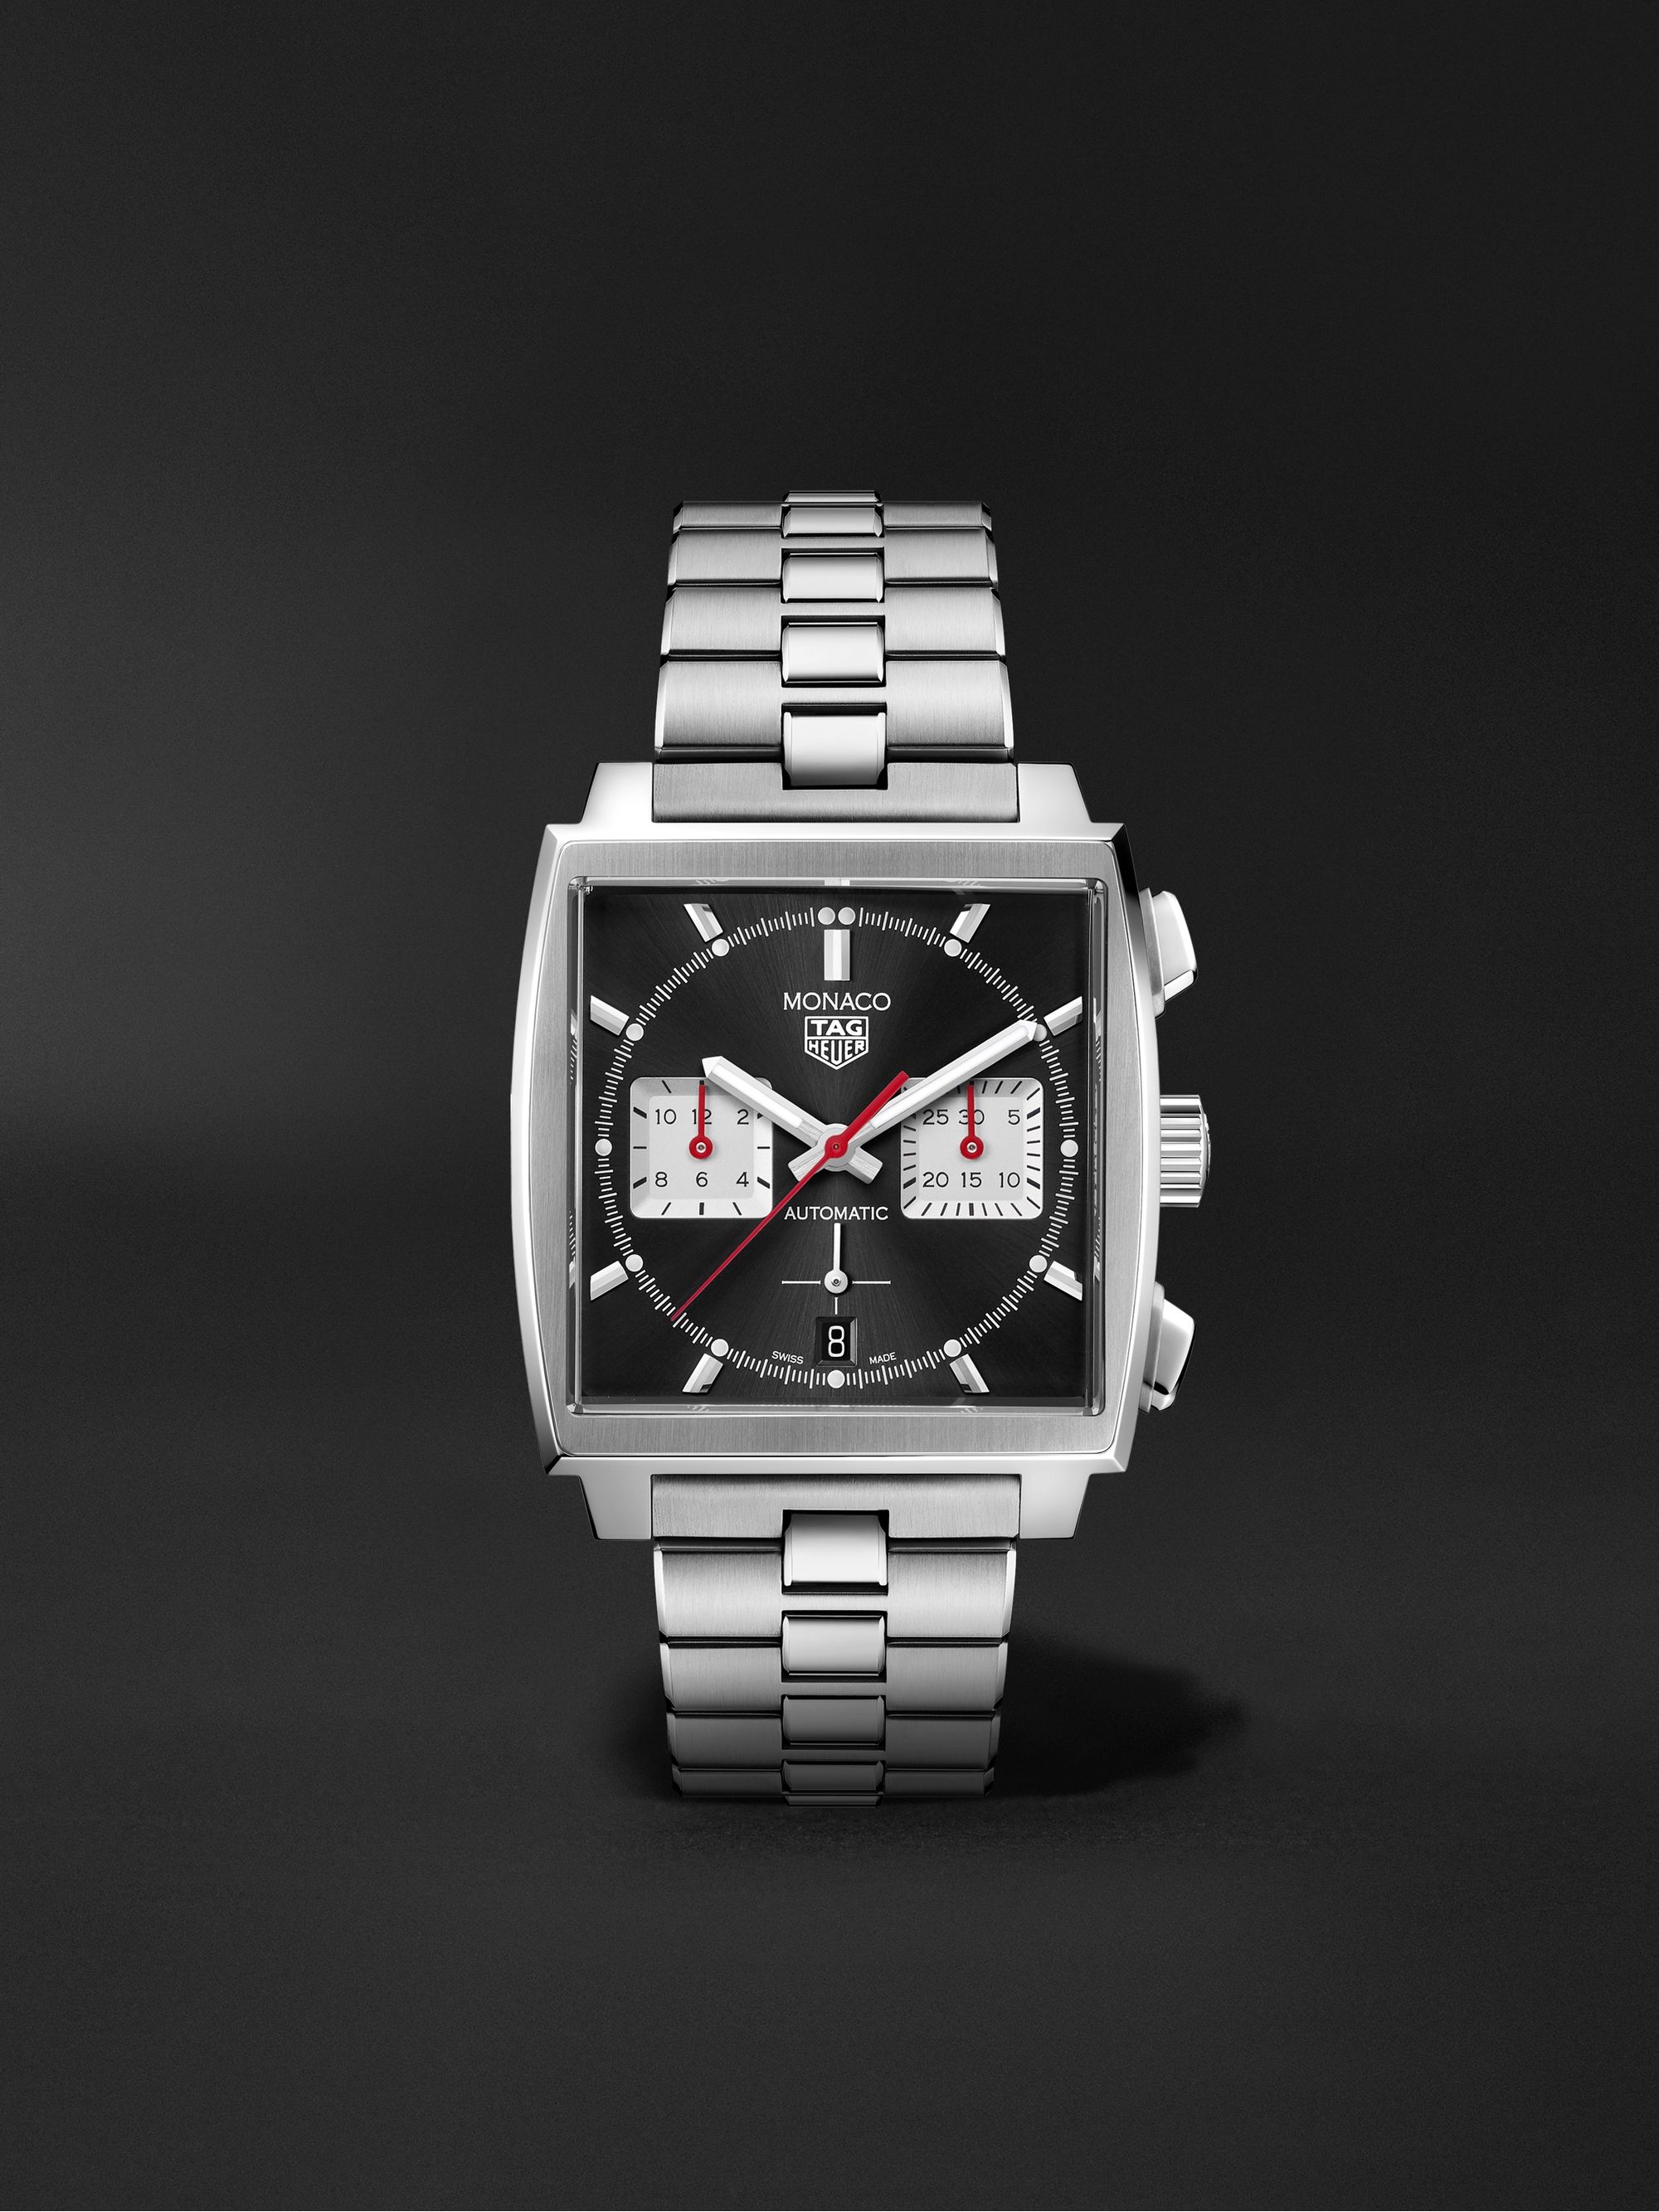 TAG Heuer Monaco Automatic Chronograph 39mm Stainless Steel Watch, Ref. No. CBL2113.BA0644